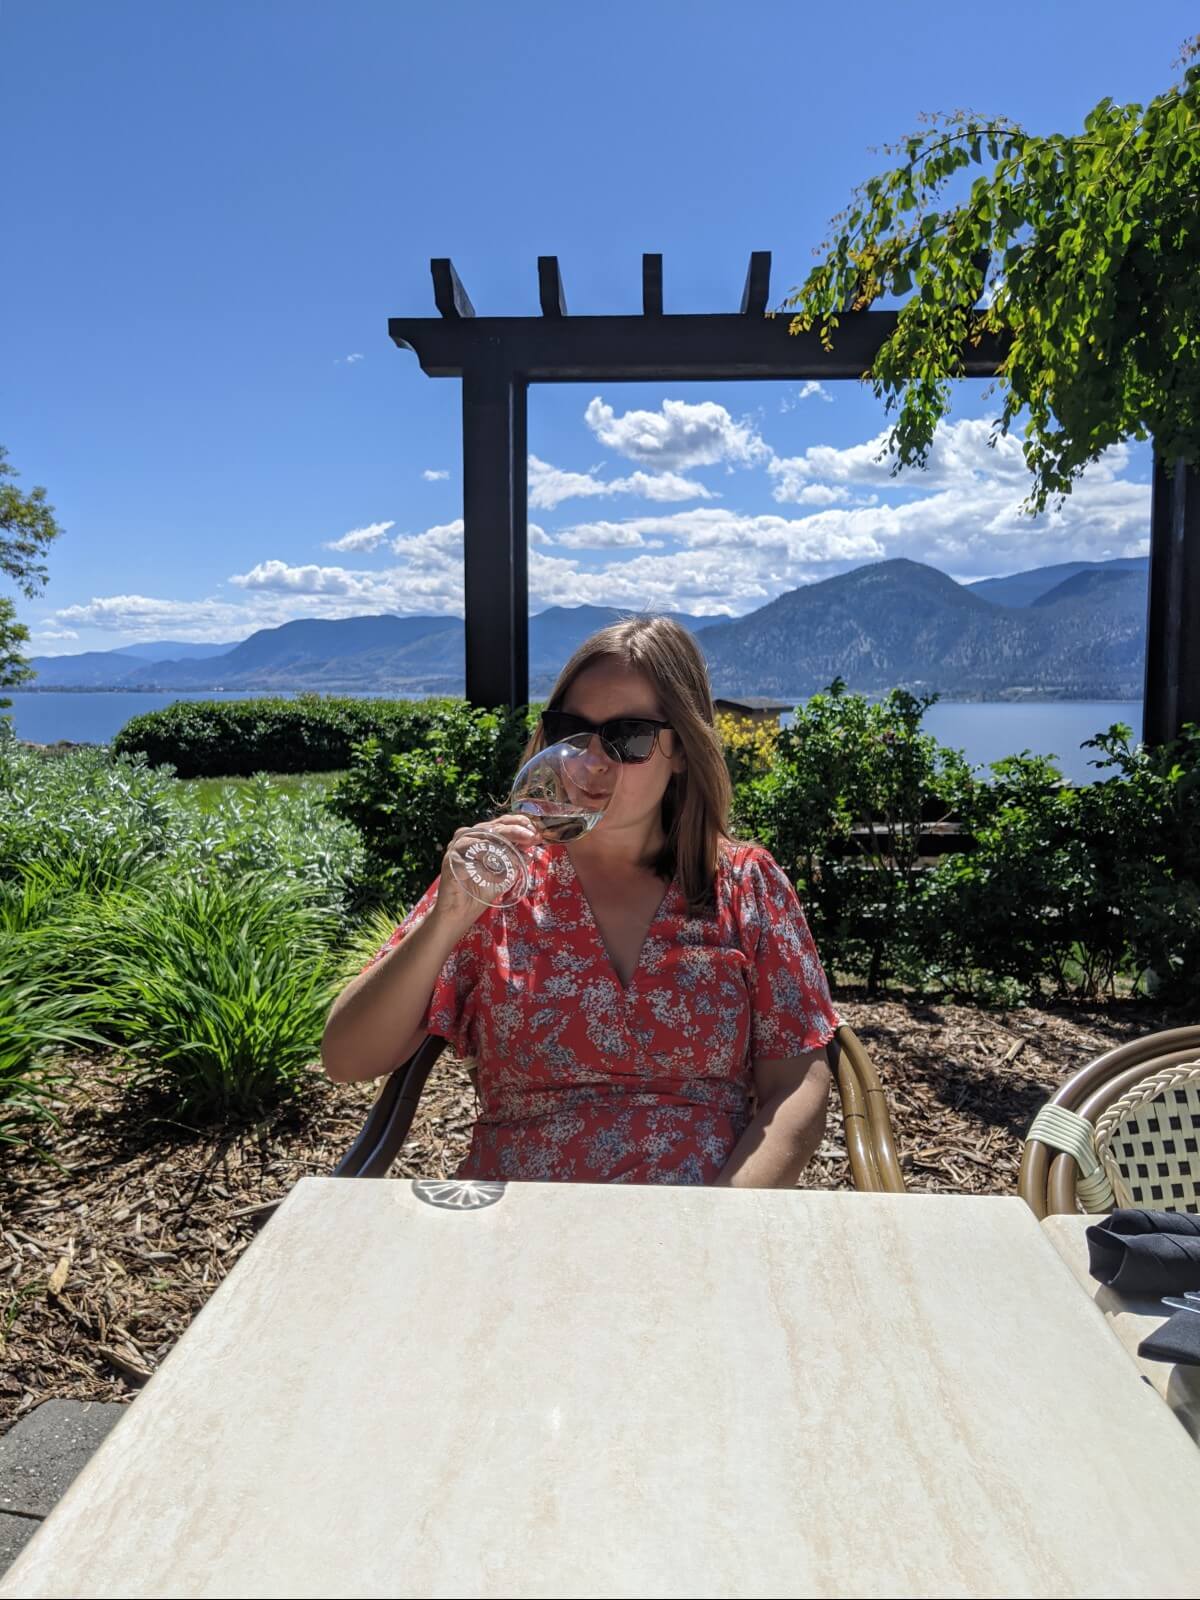 Front view of woman in red dress drinking from wine glass at white table, with view of lake and mountains behind